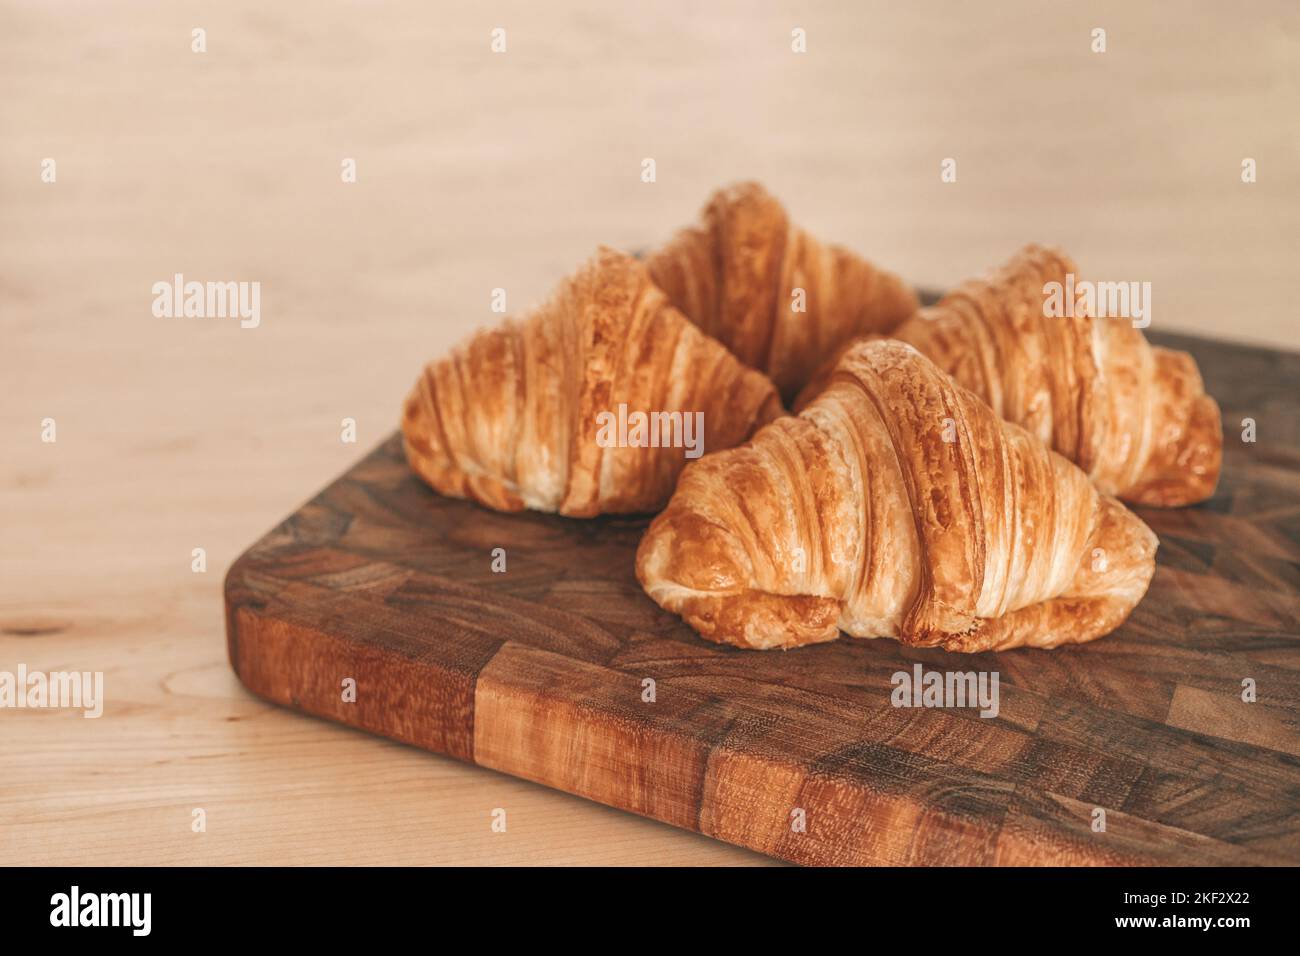 Croissants fresh baked pastries from french bakery. 4 viennoiseries on wooden board. Breakfast food from France baking culture. Flaky warm croissant Stock Photo